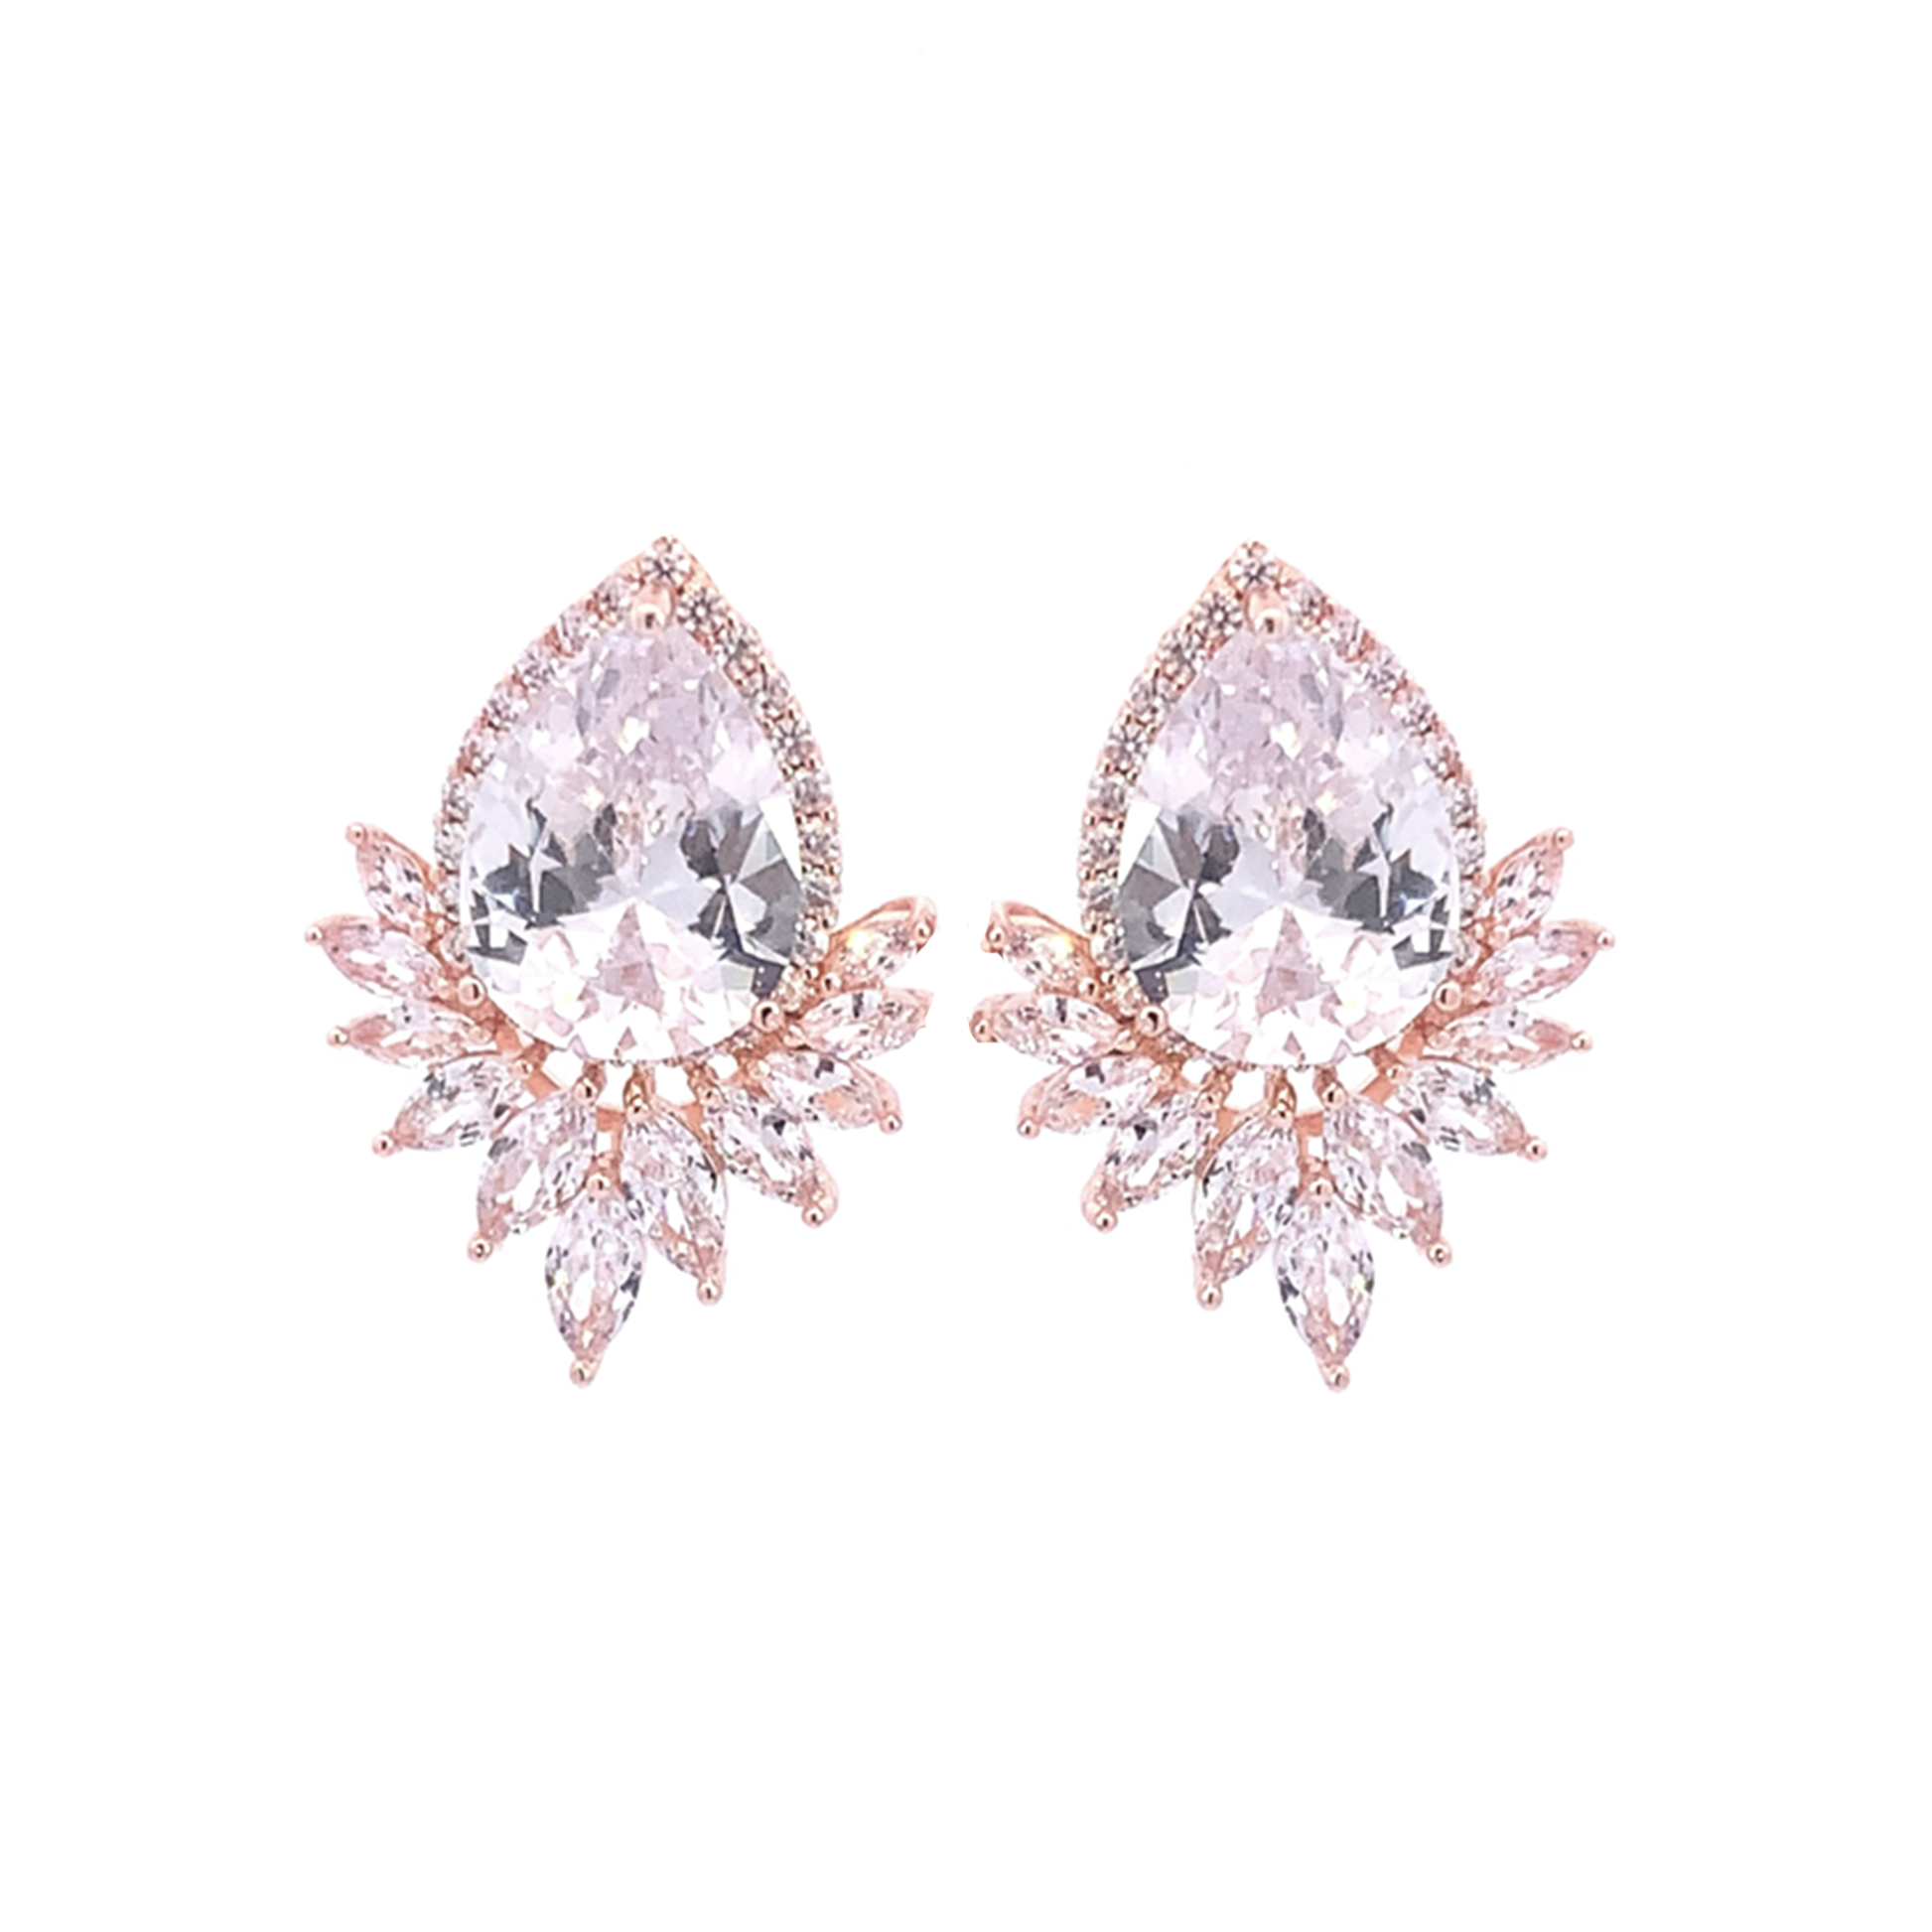 statement bridal earrings in rose gold